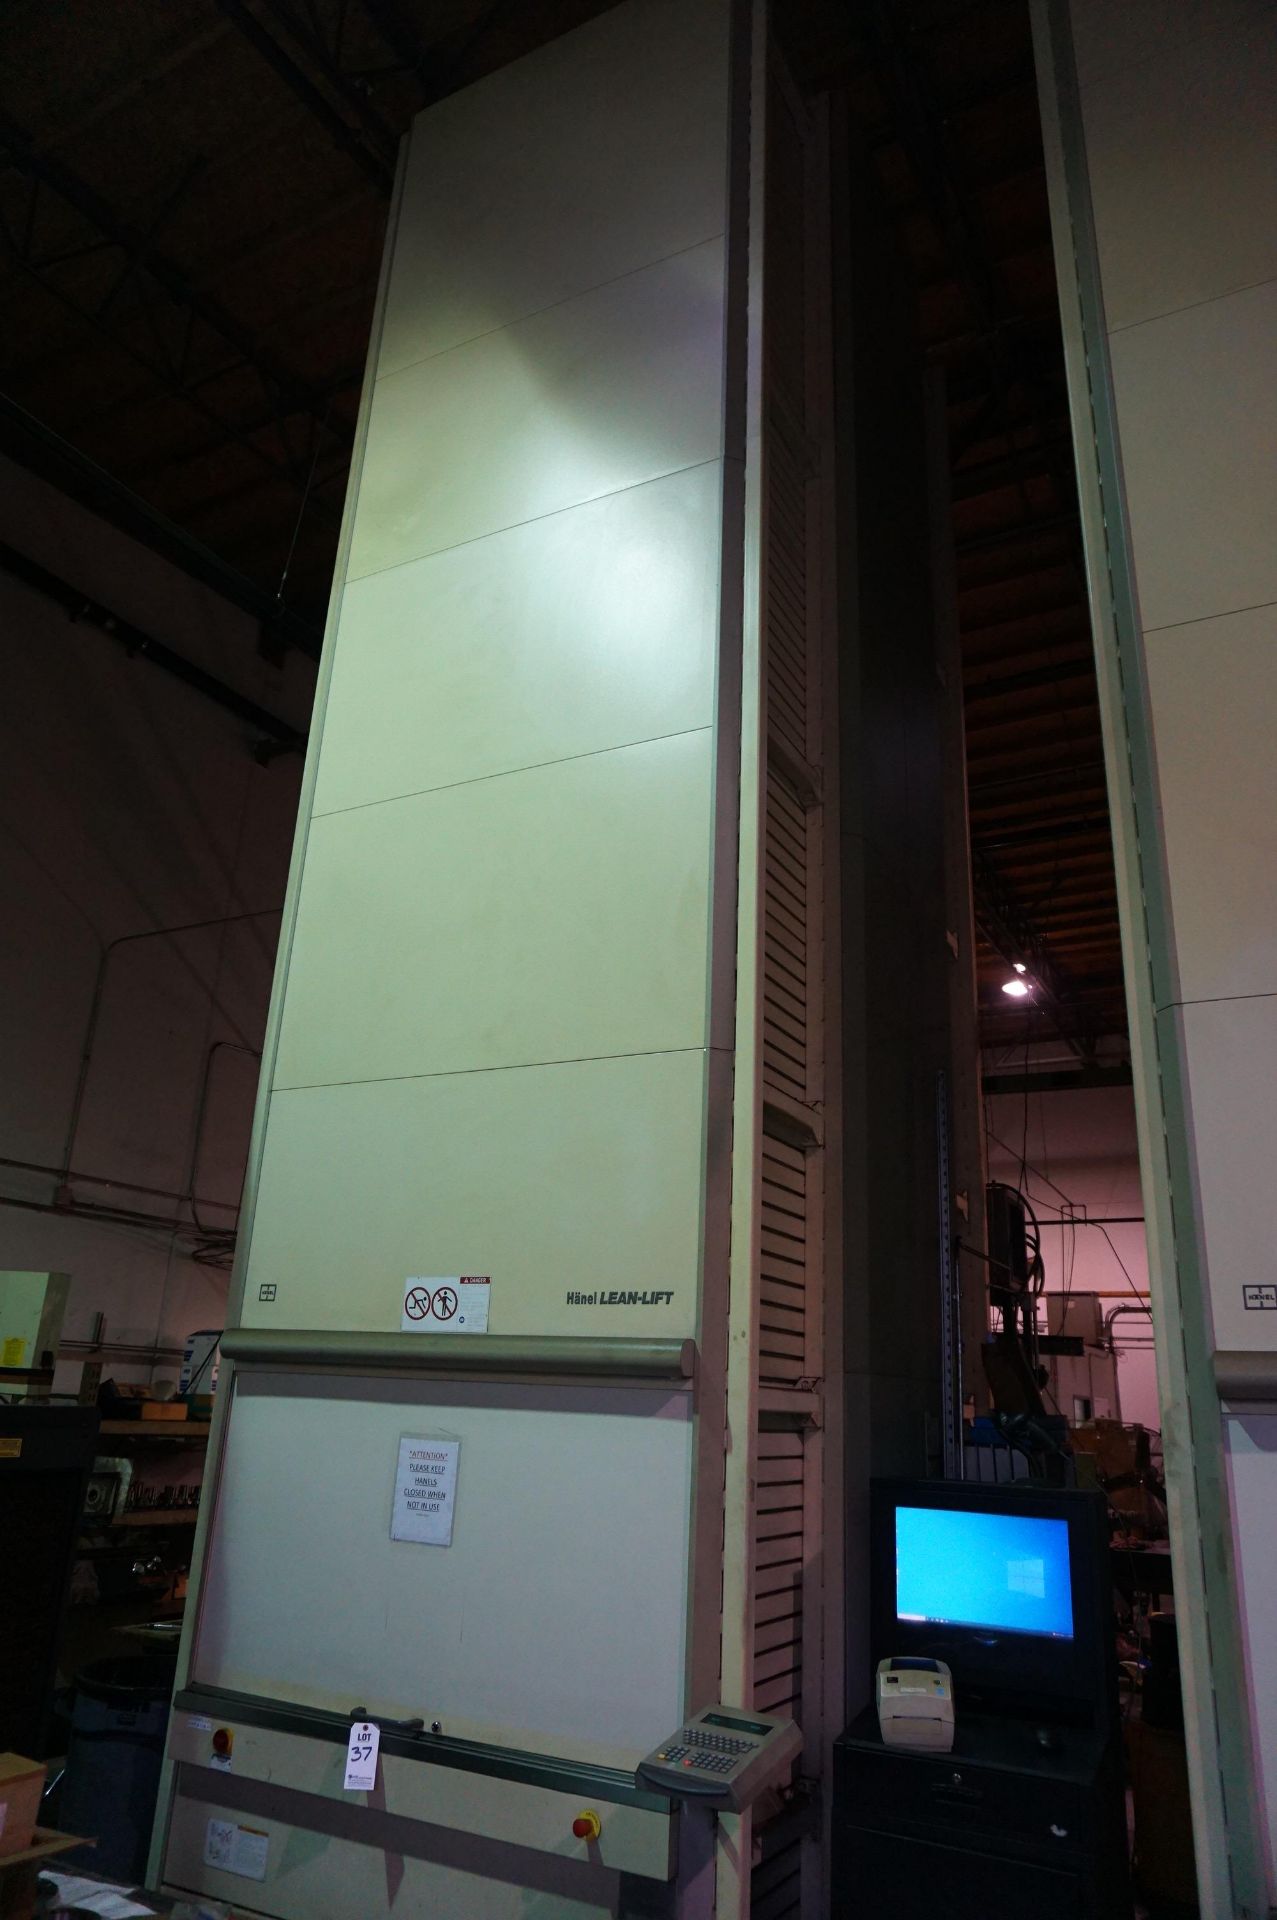 2006 HANEL LEAN LIFT MODEL 1640-825 VERTICAL LIFT MODULE, AUTOMATED SOLUTION FOR WAREHOUSE - Image 2 of 5